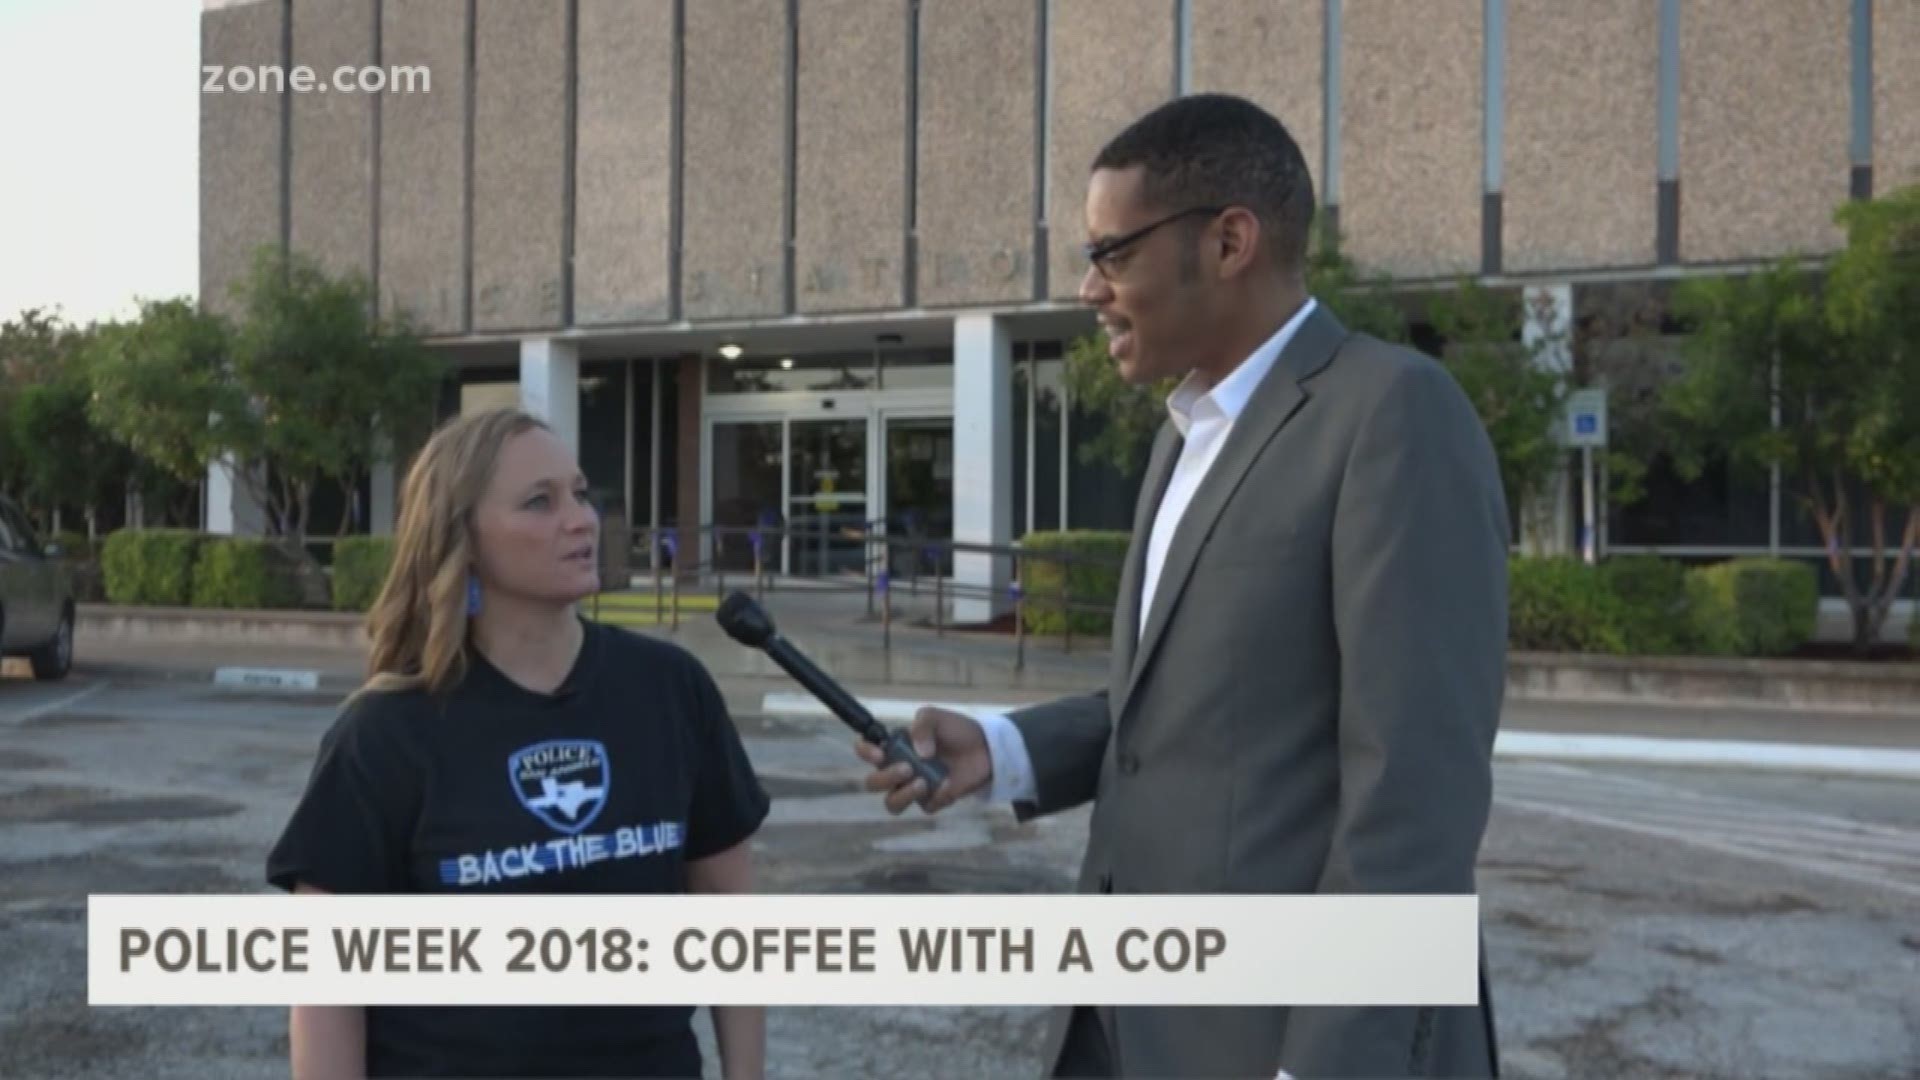 Our Malik Mingo is live at the San Angelo Police Department headquarters with details on their "Coffee with a Cop" event.